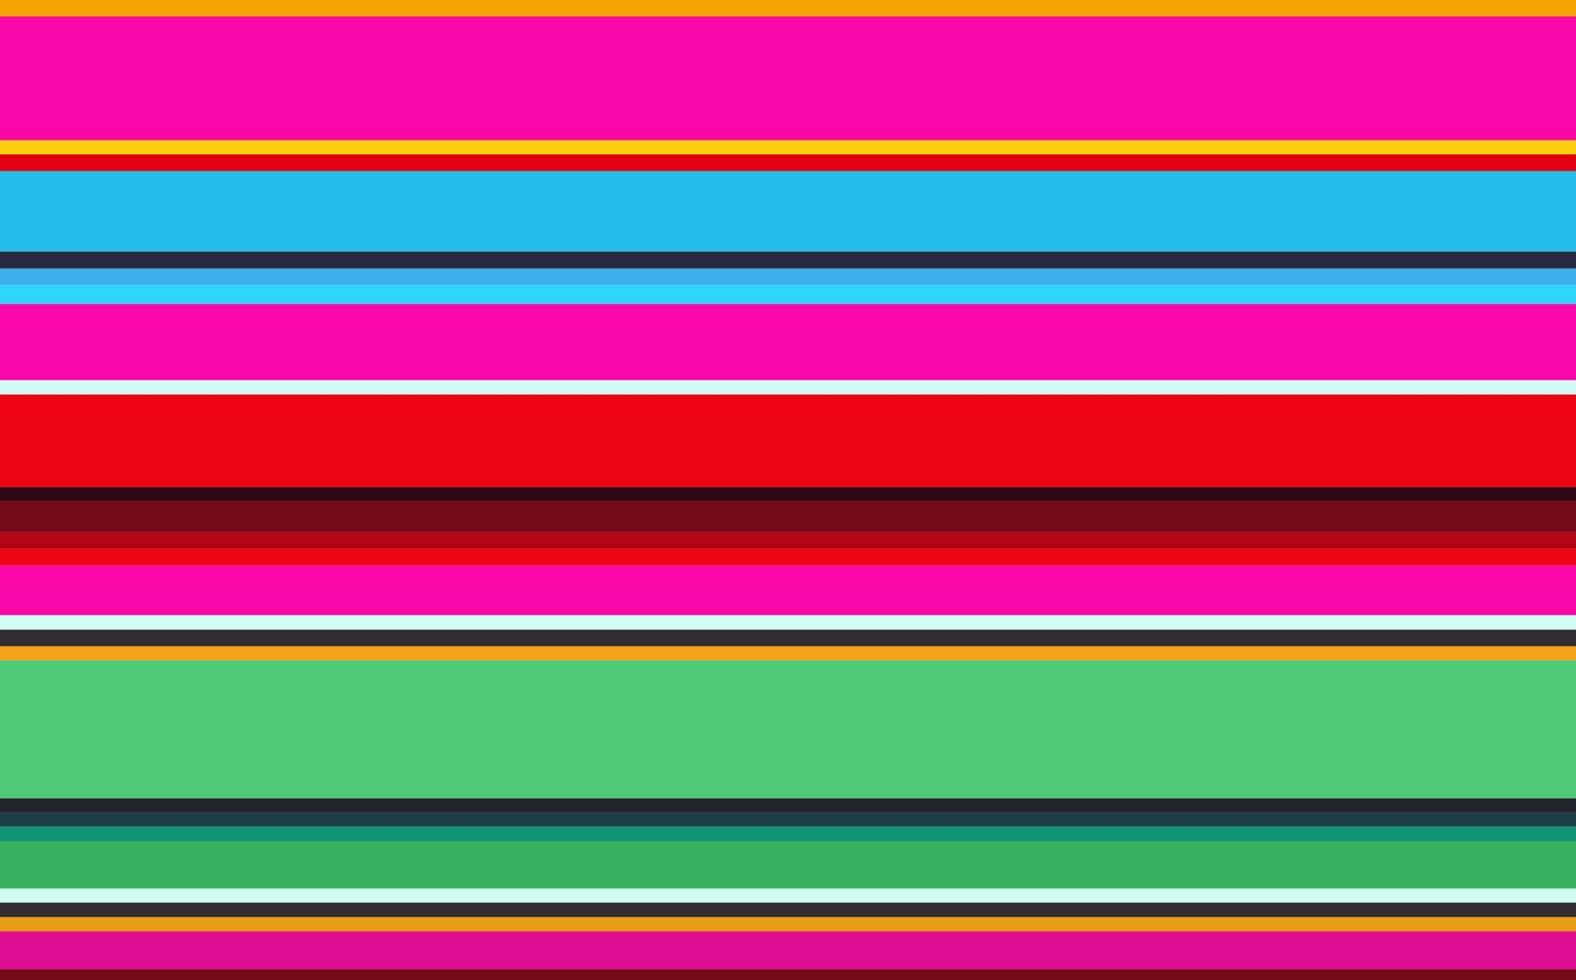 A Colorful Striped Background With A Colorful Background Wallpaper